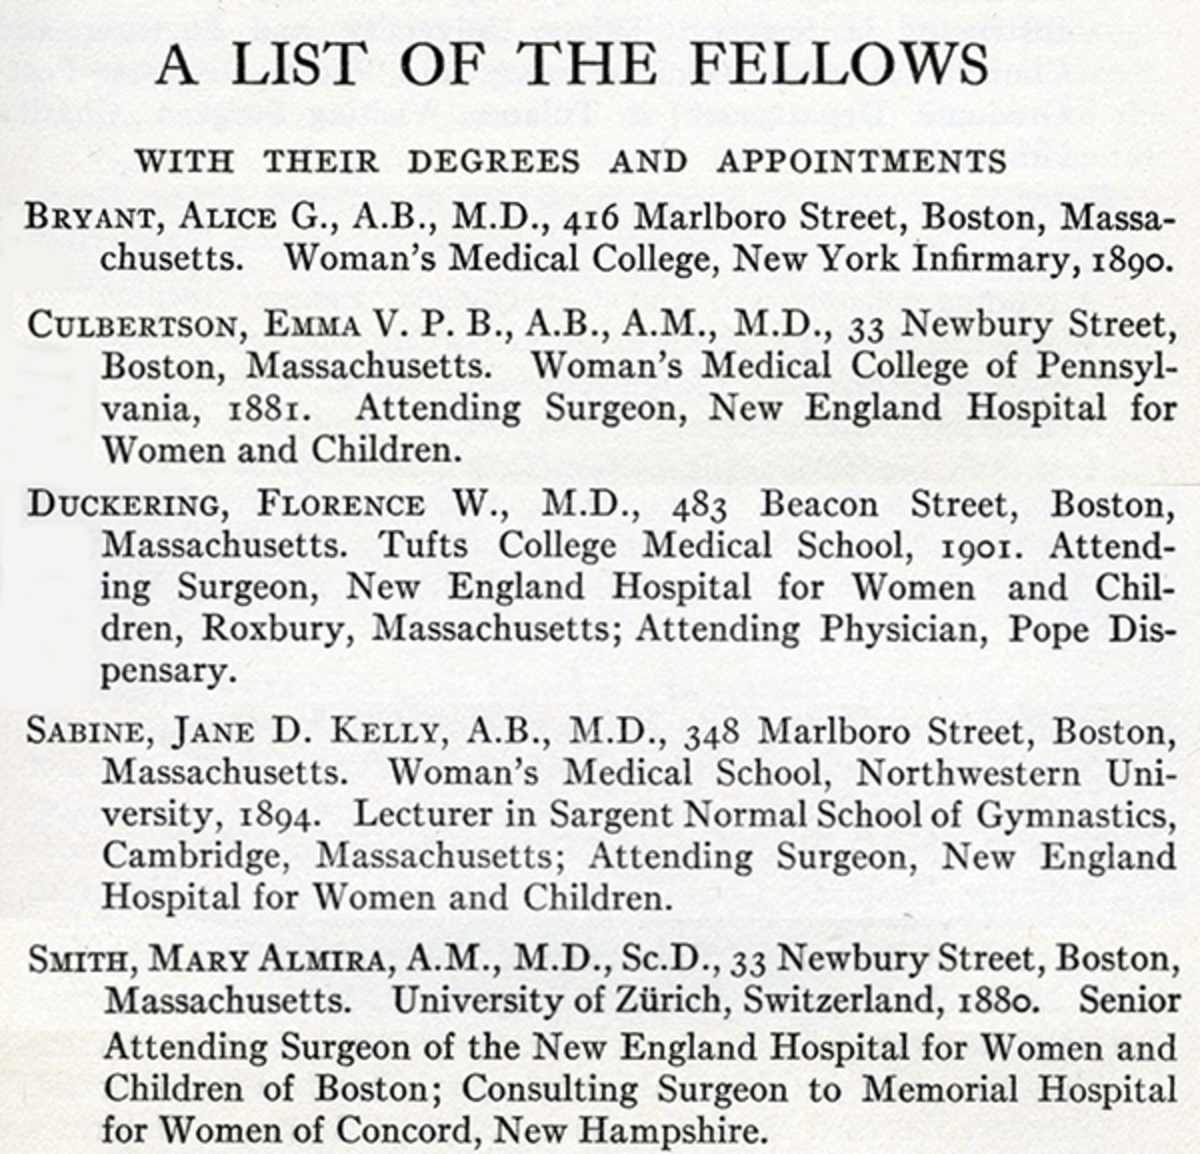 1913 American College of Surgeons yearbook,  American College of Surgeons Archives